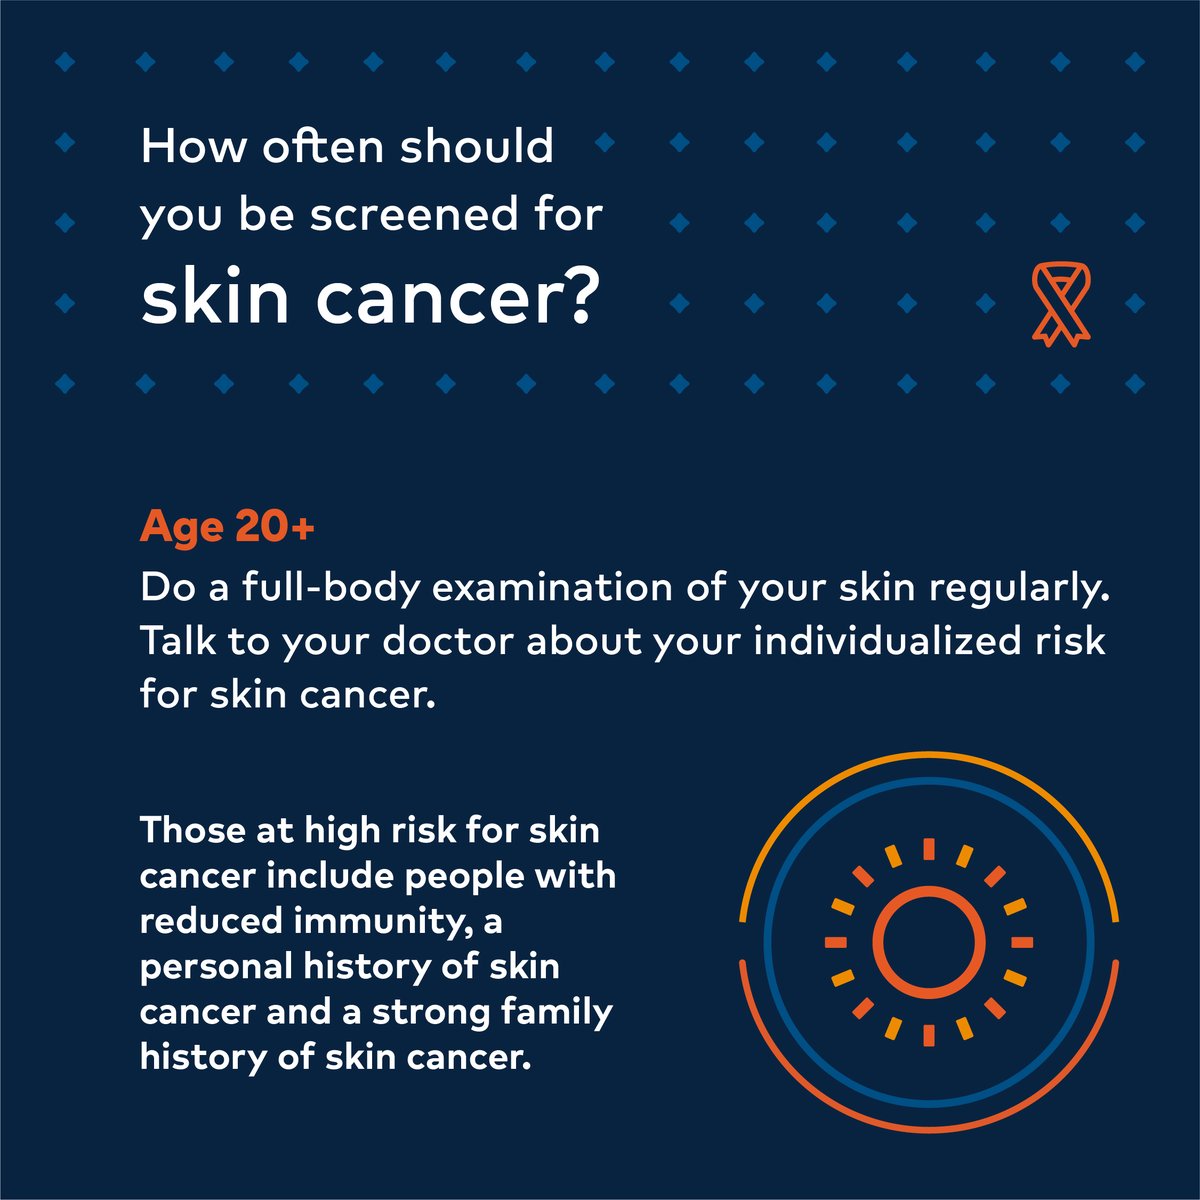 Do you have 10 to 20 minutes to spare? That's all you need for a full-body skin self-exam — one of the best ways to catch skin cancer early, when it’s most treatable. Take care of your skin with these screening guidelines. Find a primary care physician: bit.ly/4540BXP